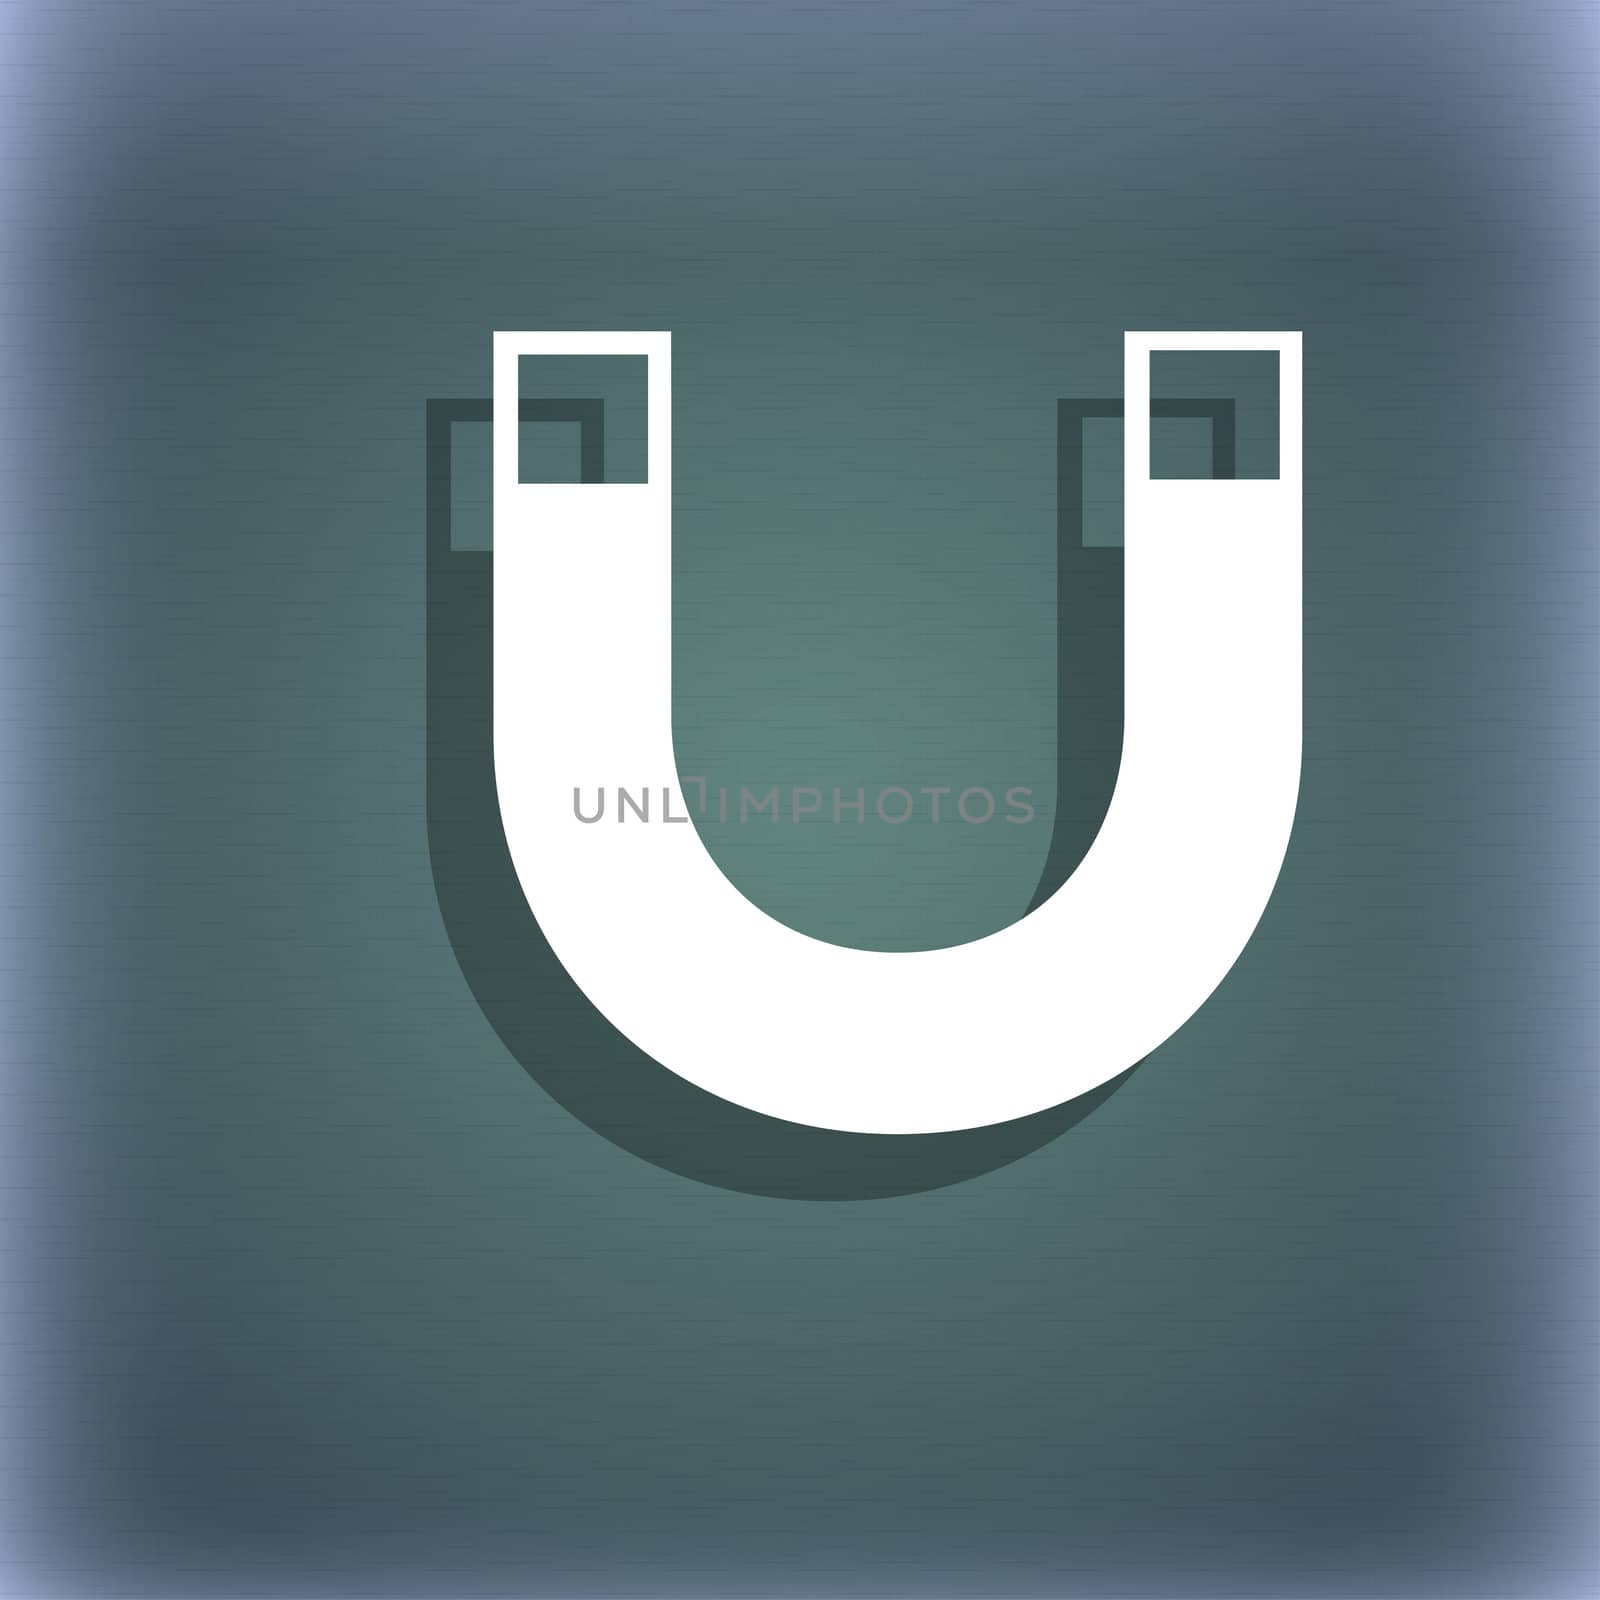 magnet sign icon. horseshoe it symbol. Repair sig. On the blue-green abstract background with shadow and space for your text. illustration